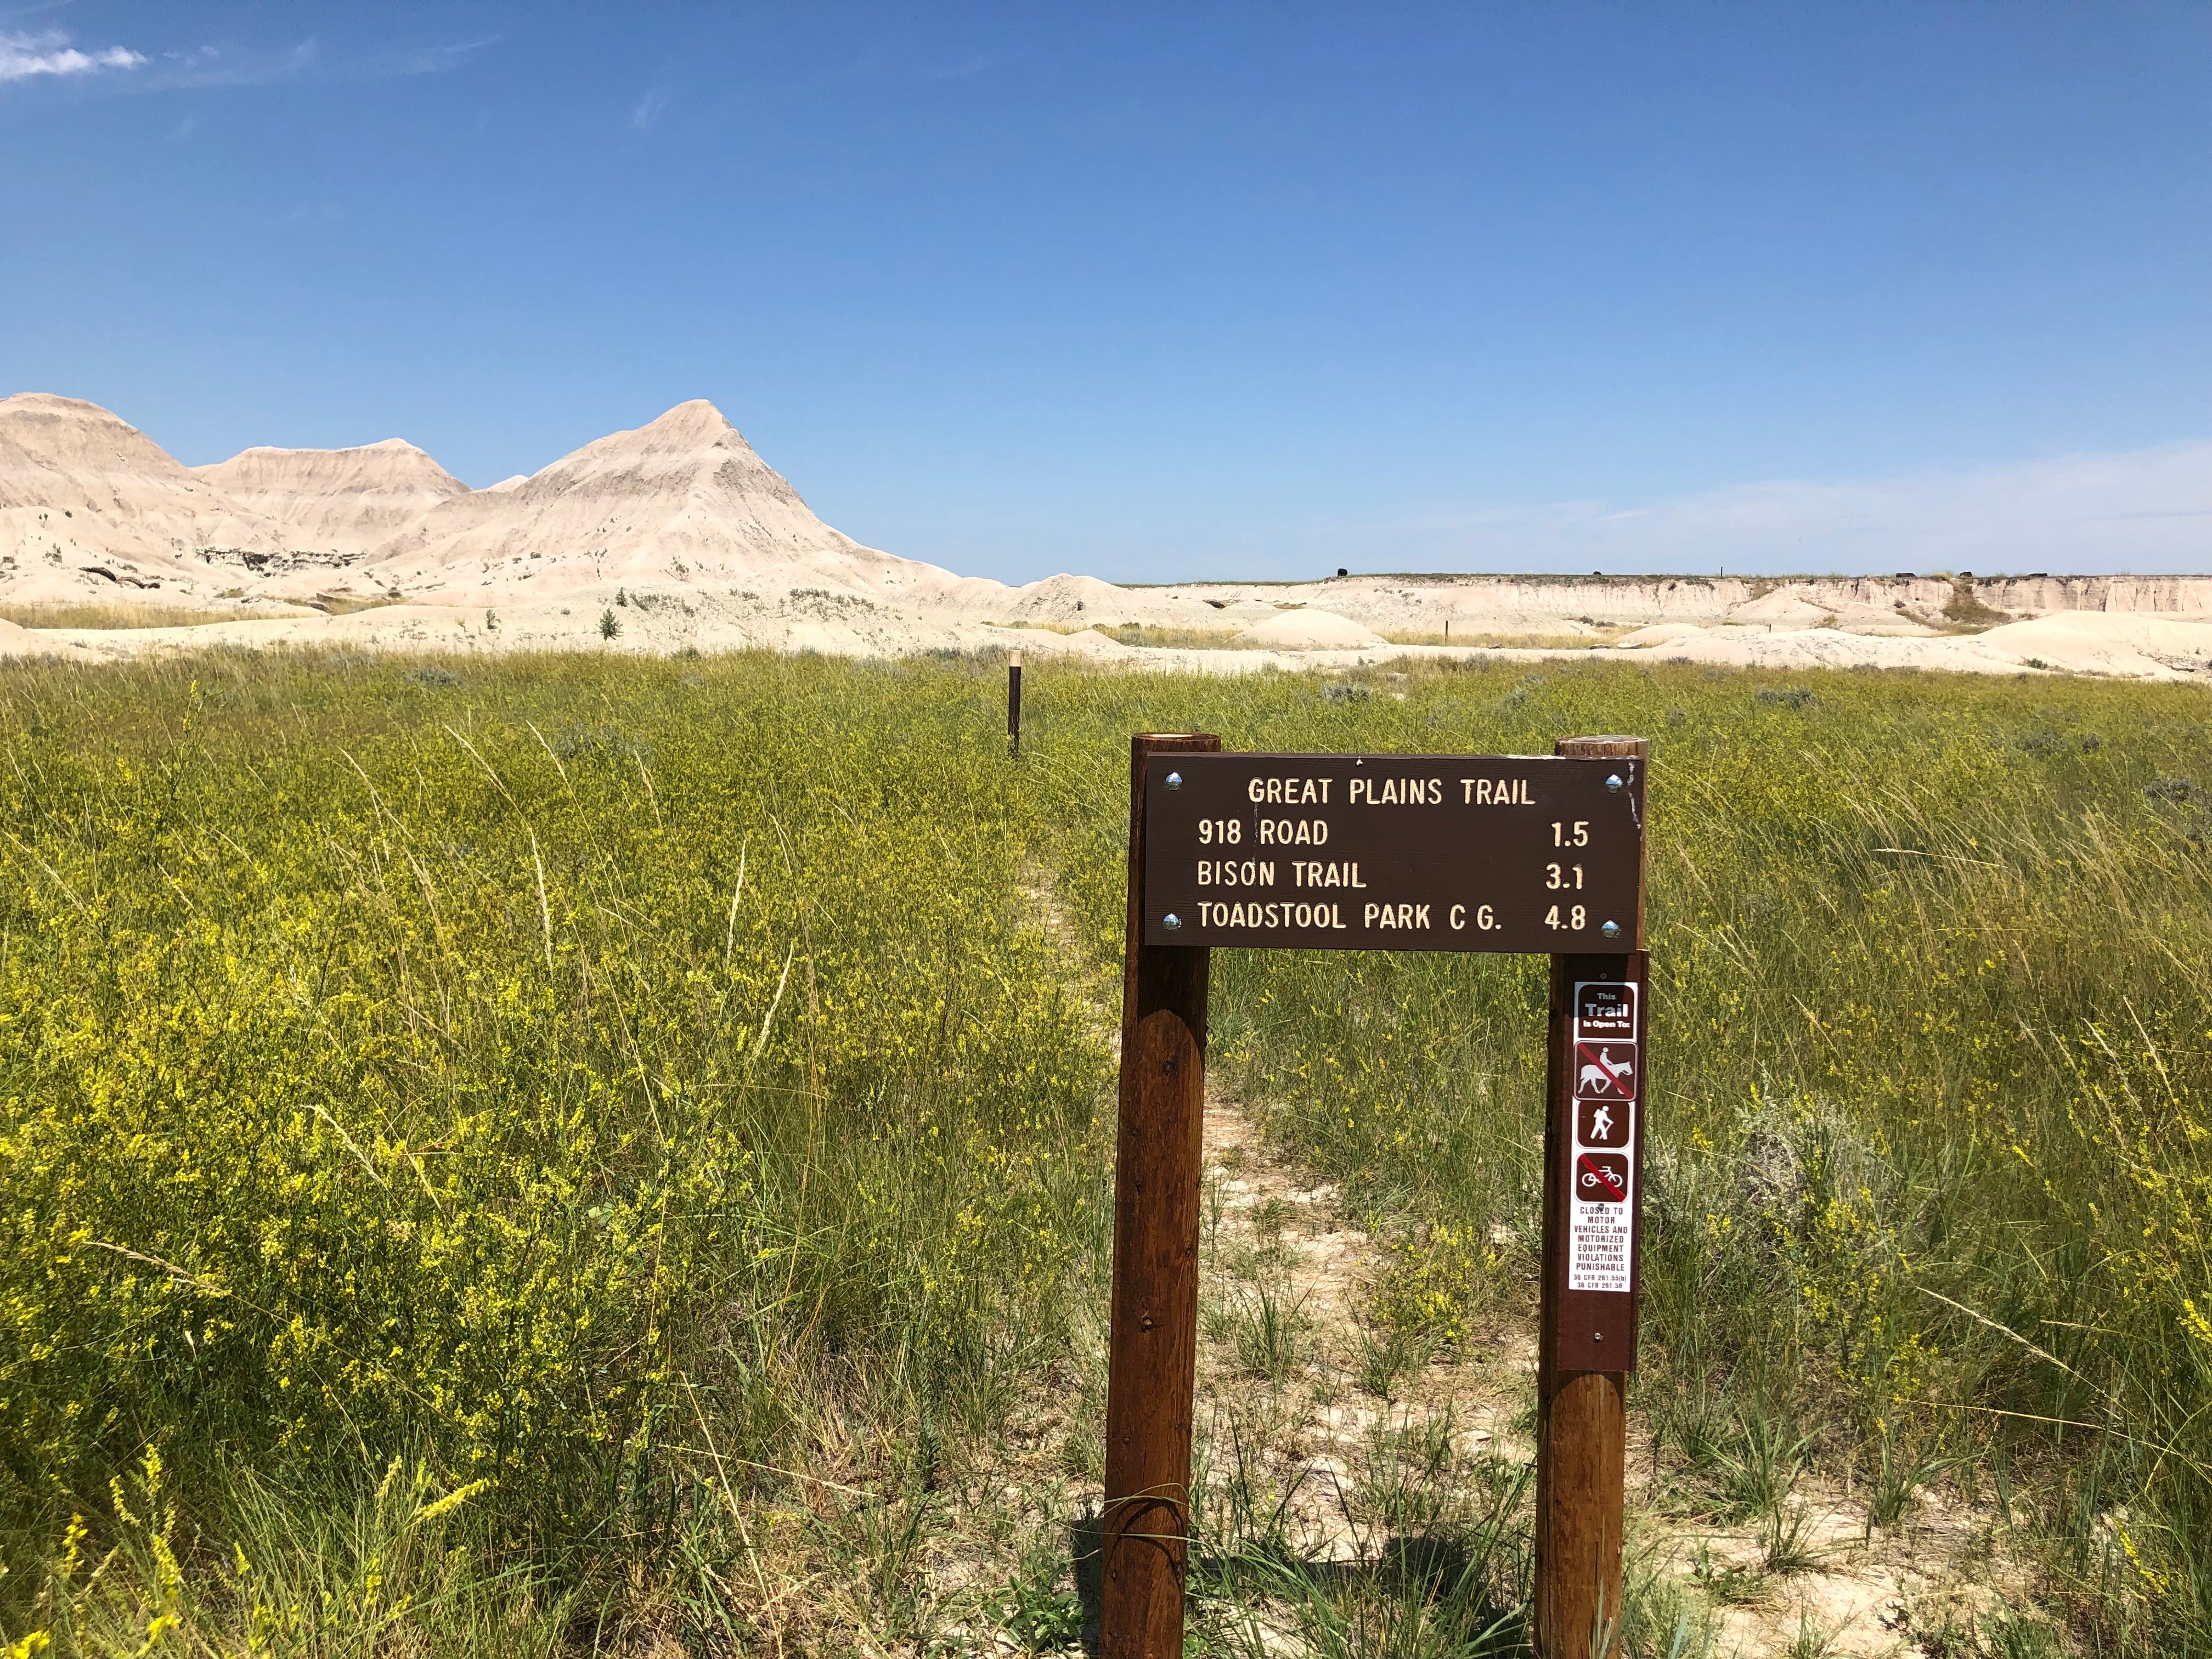 Signage for additional hiking trails